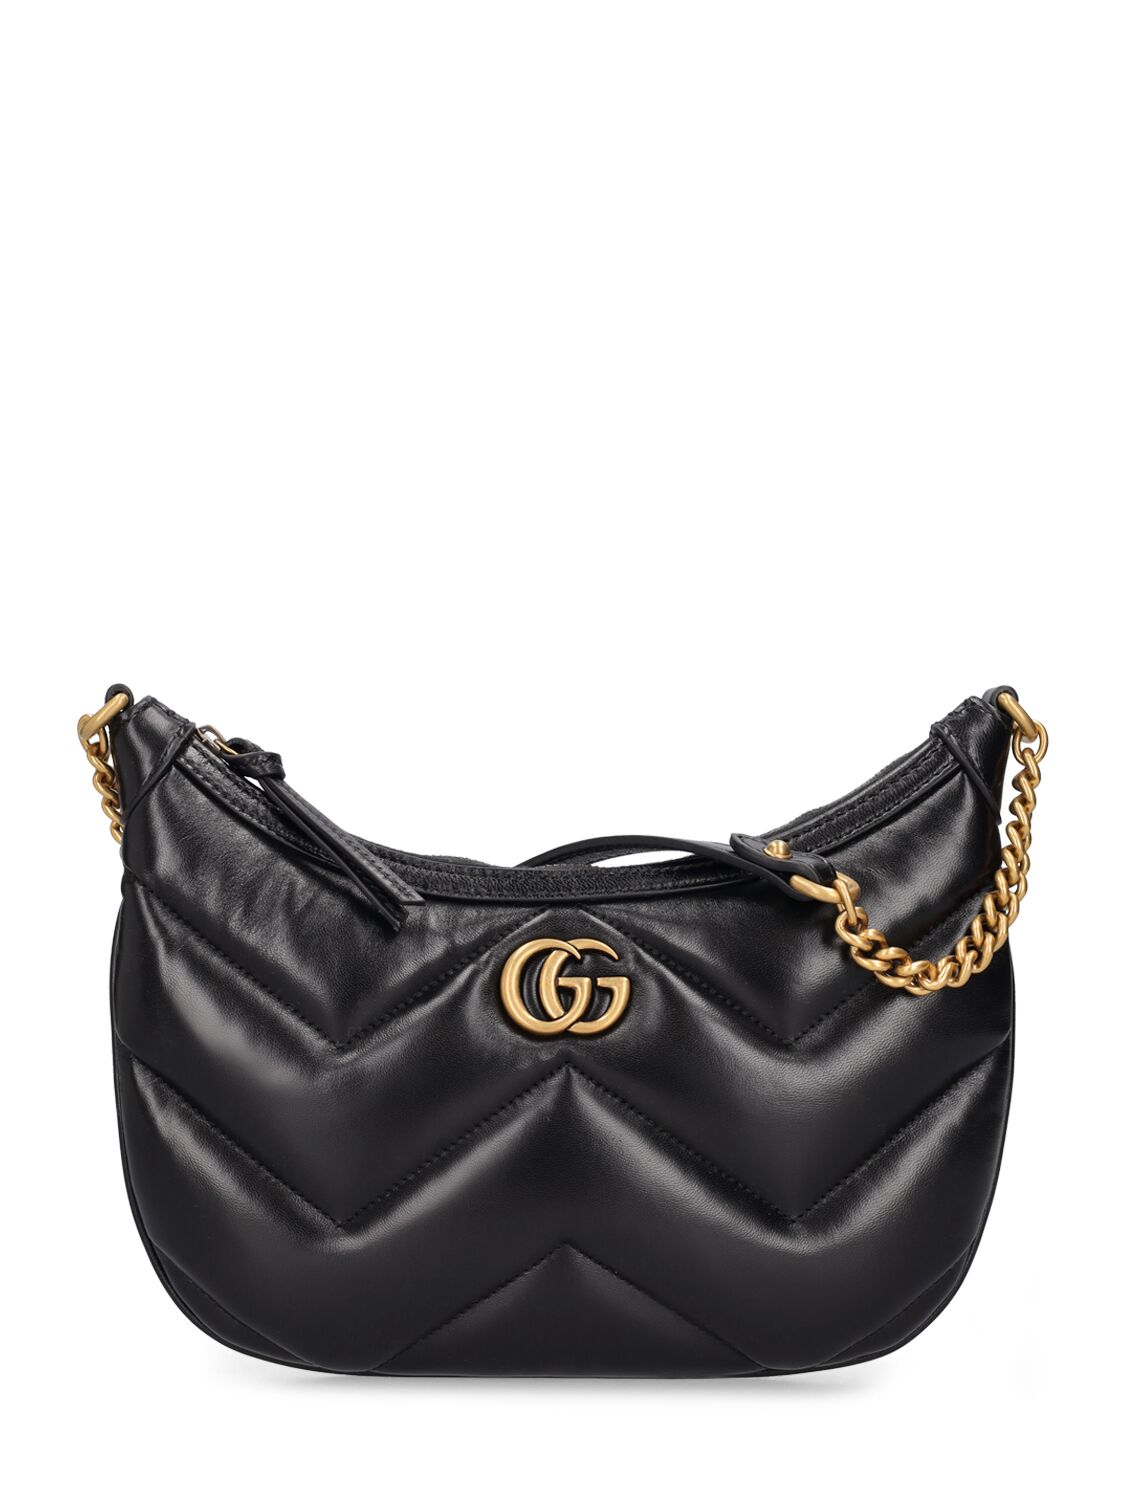 Gucci Small Gg Marmont Leather Shoulder Bag In Black